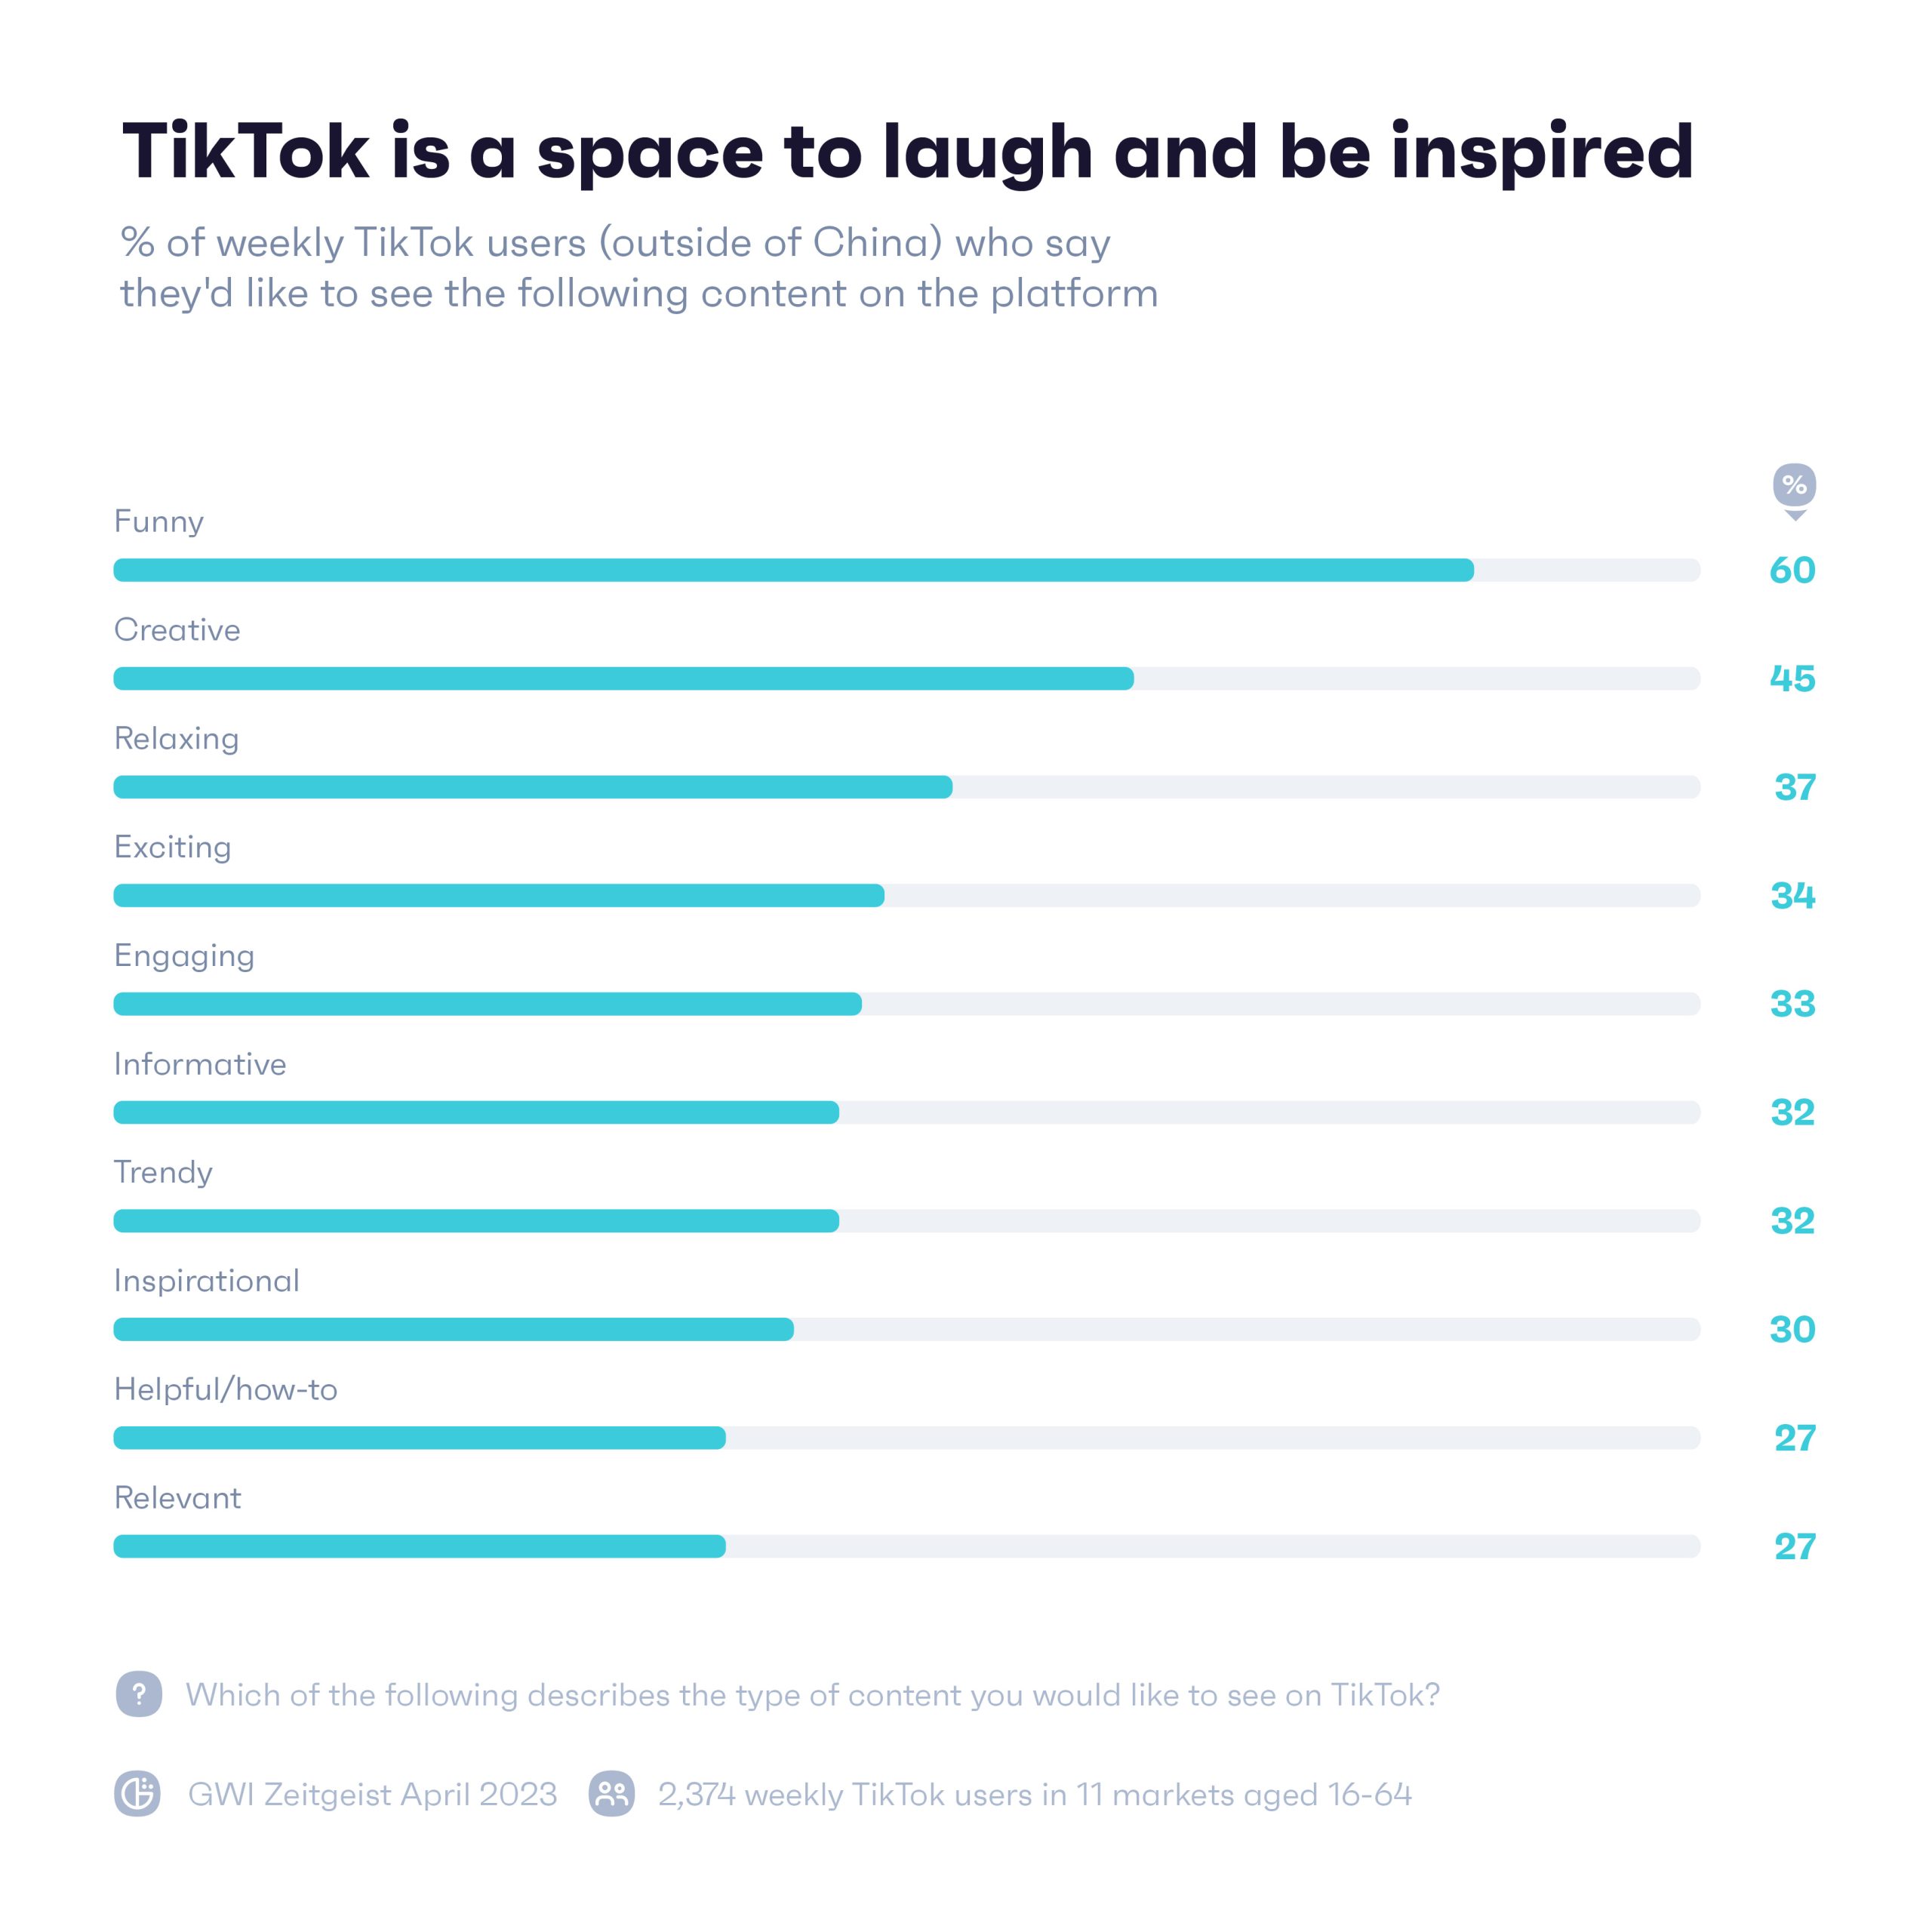 Chart showing the percentage of weekly users of TikTok who say they like to see the following sort of content